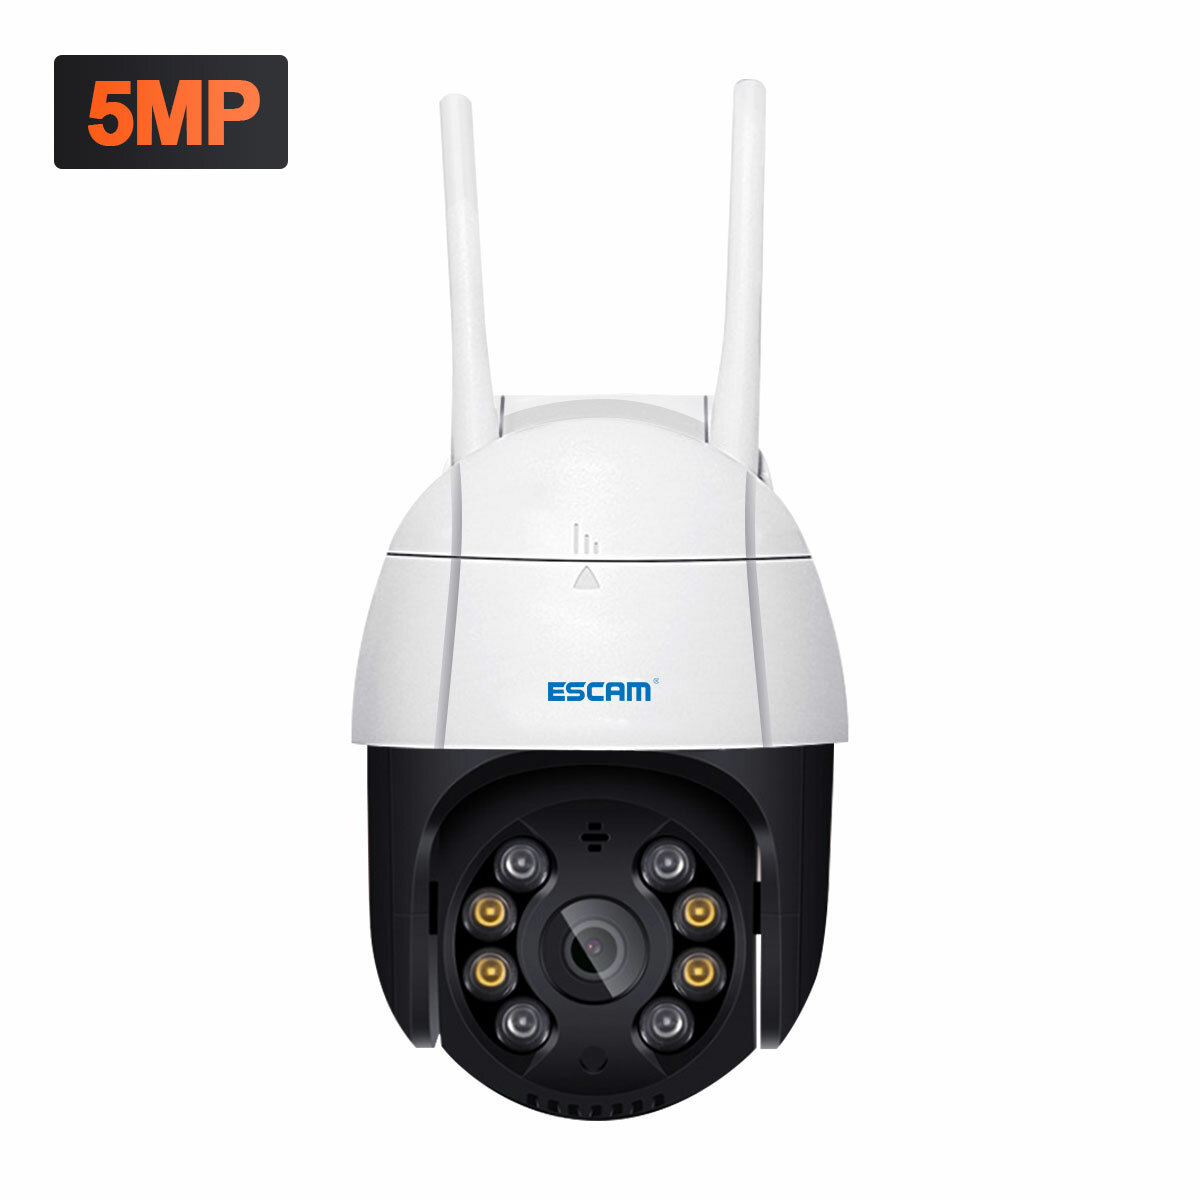 Image of ESCAM QF518 5MP Pan/Tilt AI Humanoid Detection Auto Tracking Cloud Storage Waterproof WiFi IP Camera with Two Way Audio